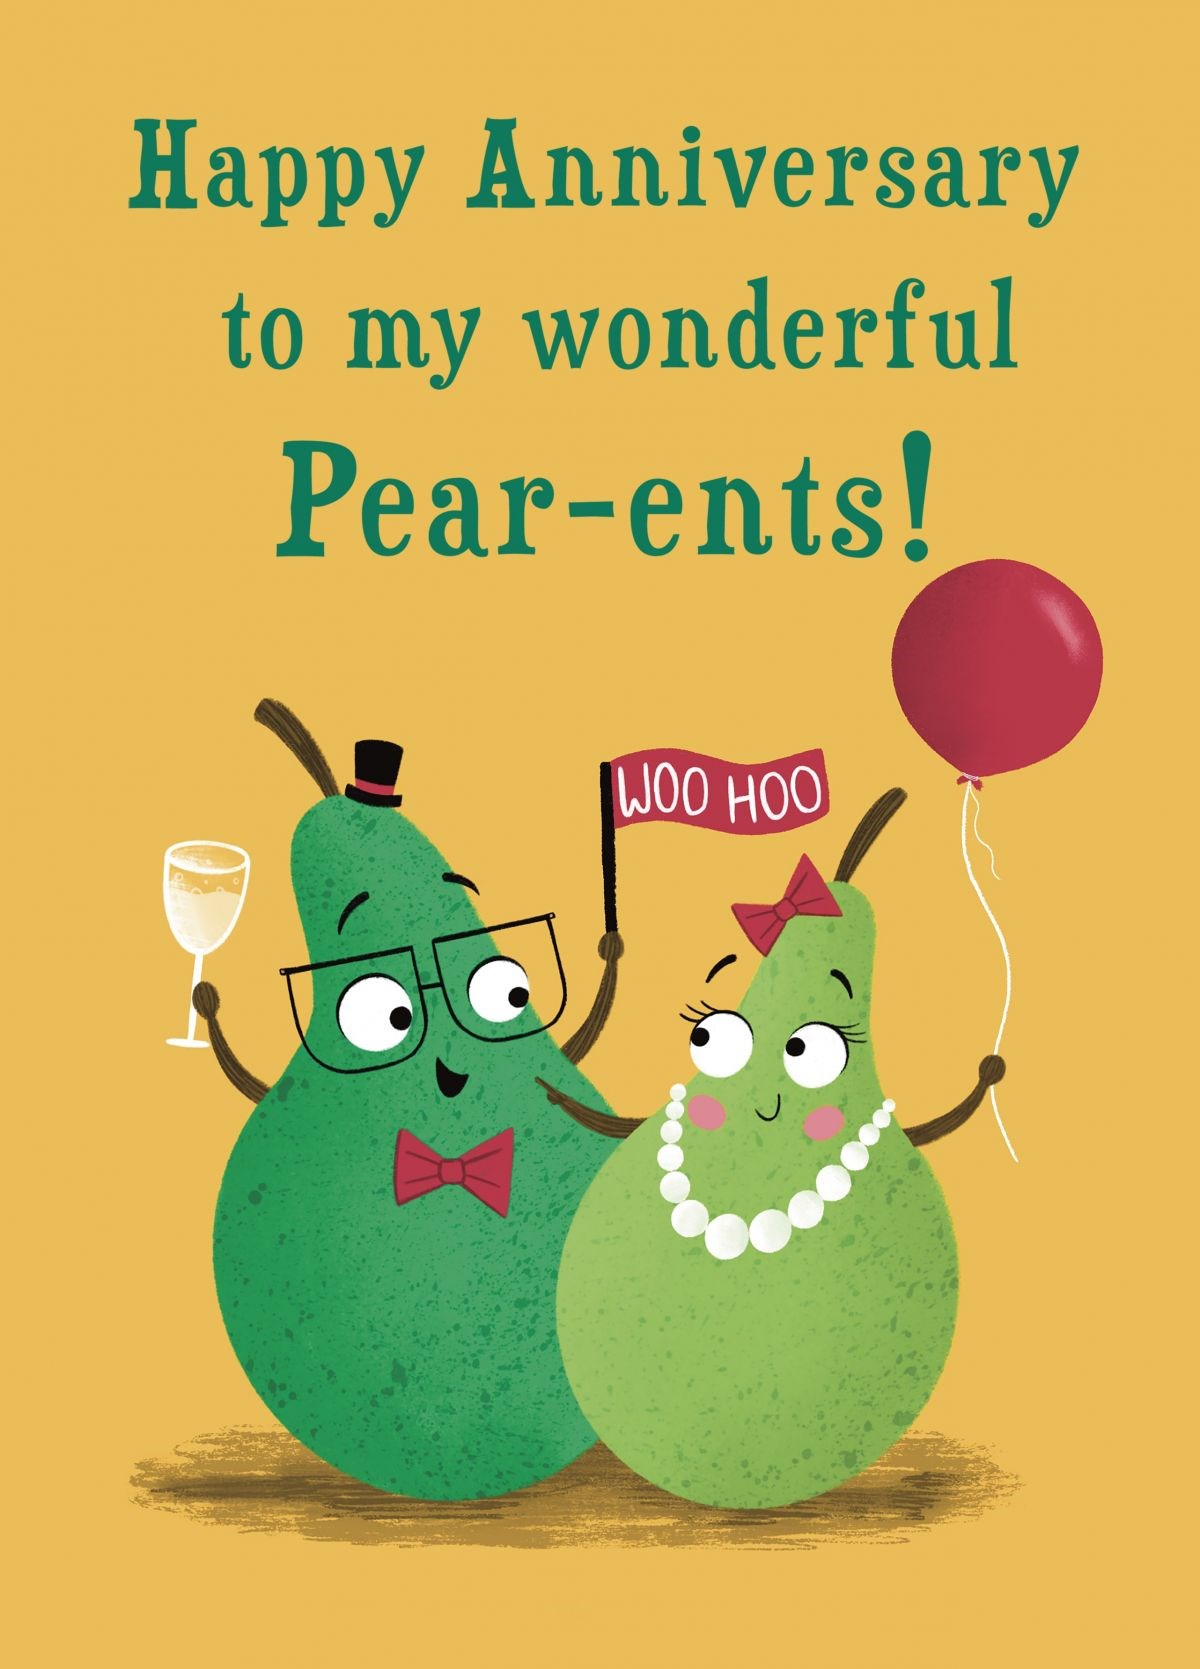 Pear-ents Funny Pears Anniversary Card | Scribbler